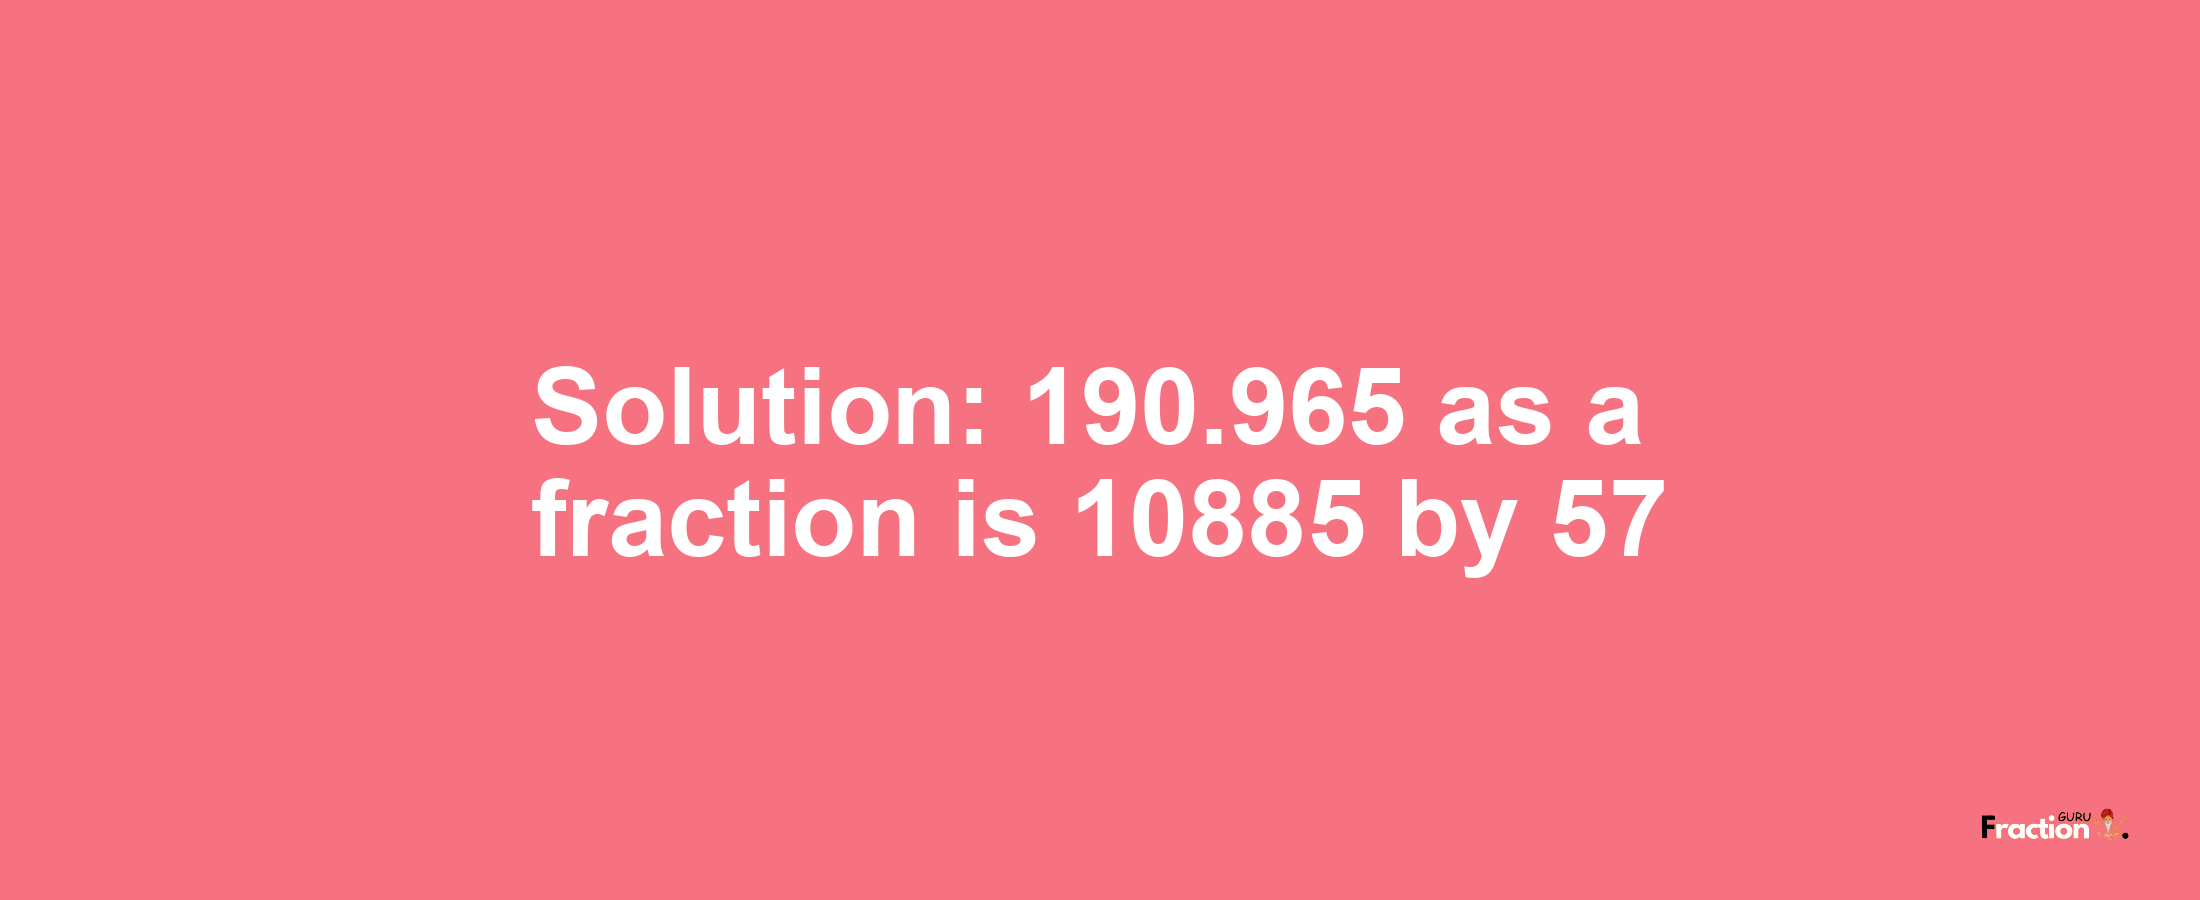 Solution:190.965 as a fraction is 10885/57